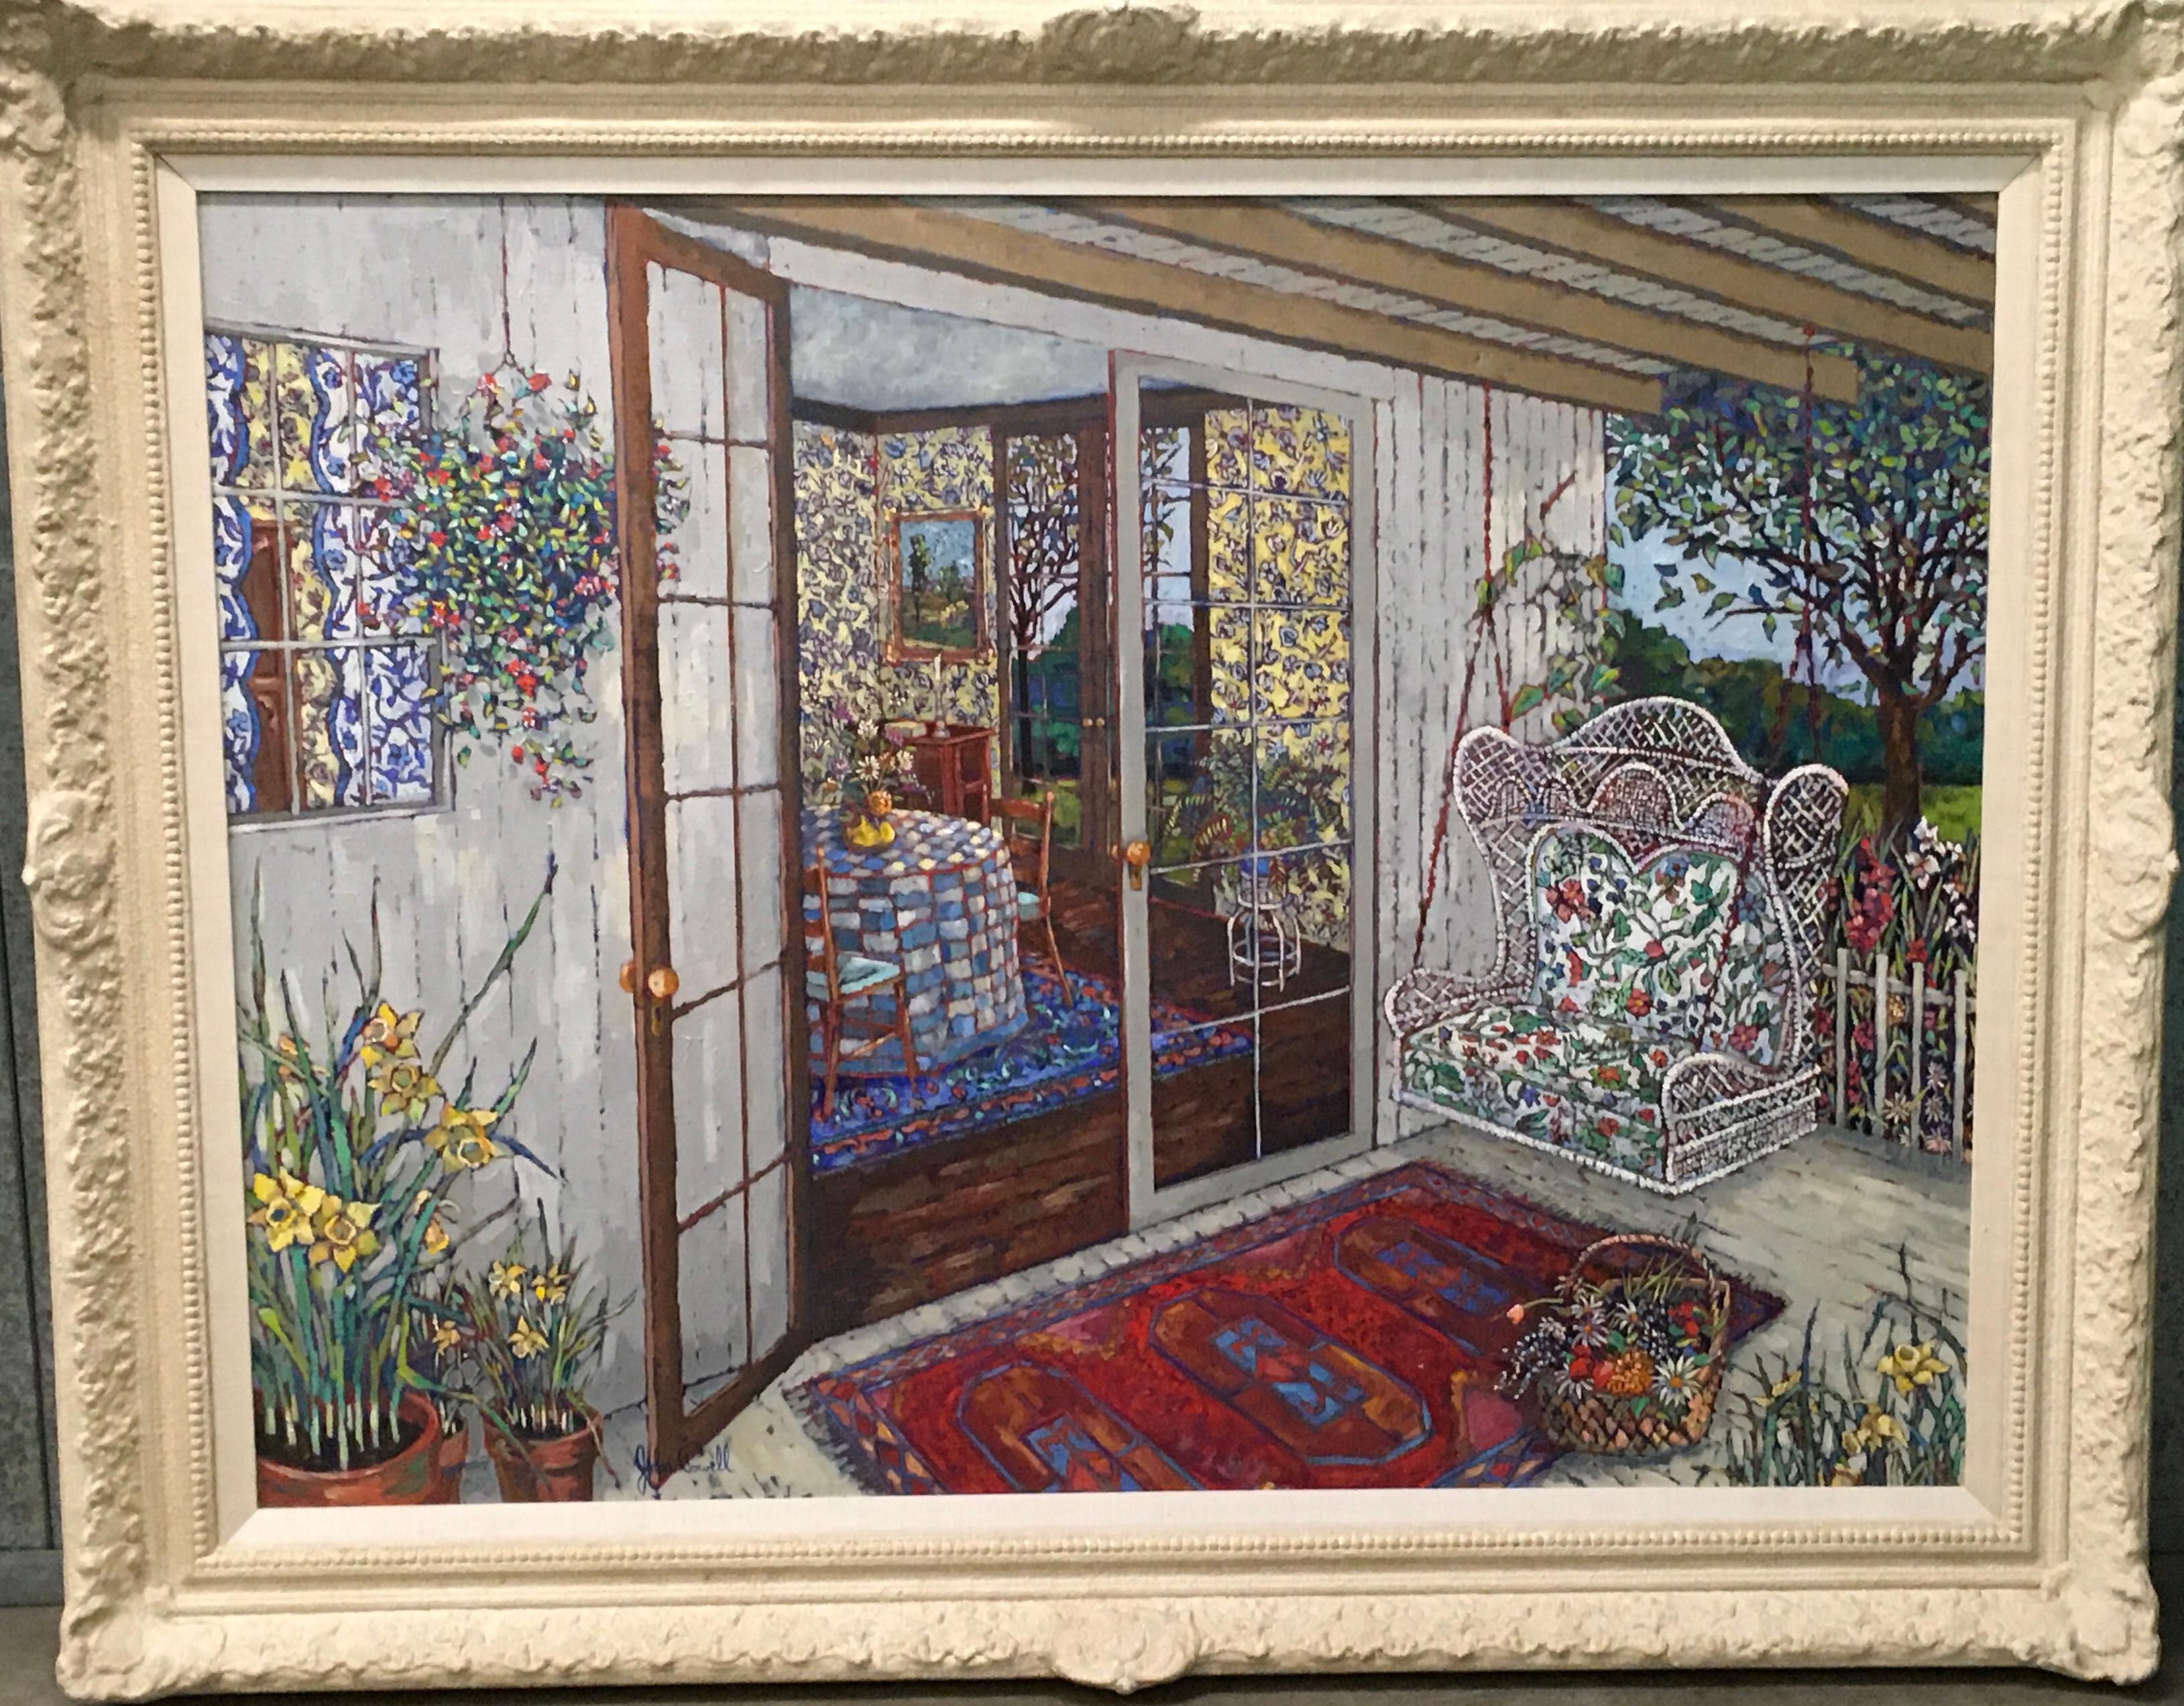 Daffodils & Colorful Flowers Wicker Porch Swing and Maine Landscape 1970s oil/c - Painting by John Powell